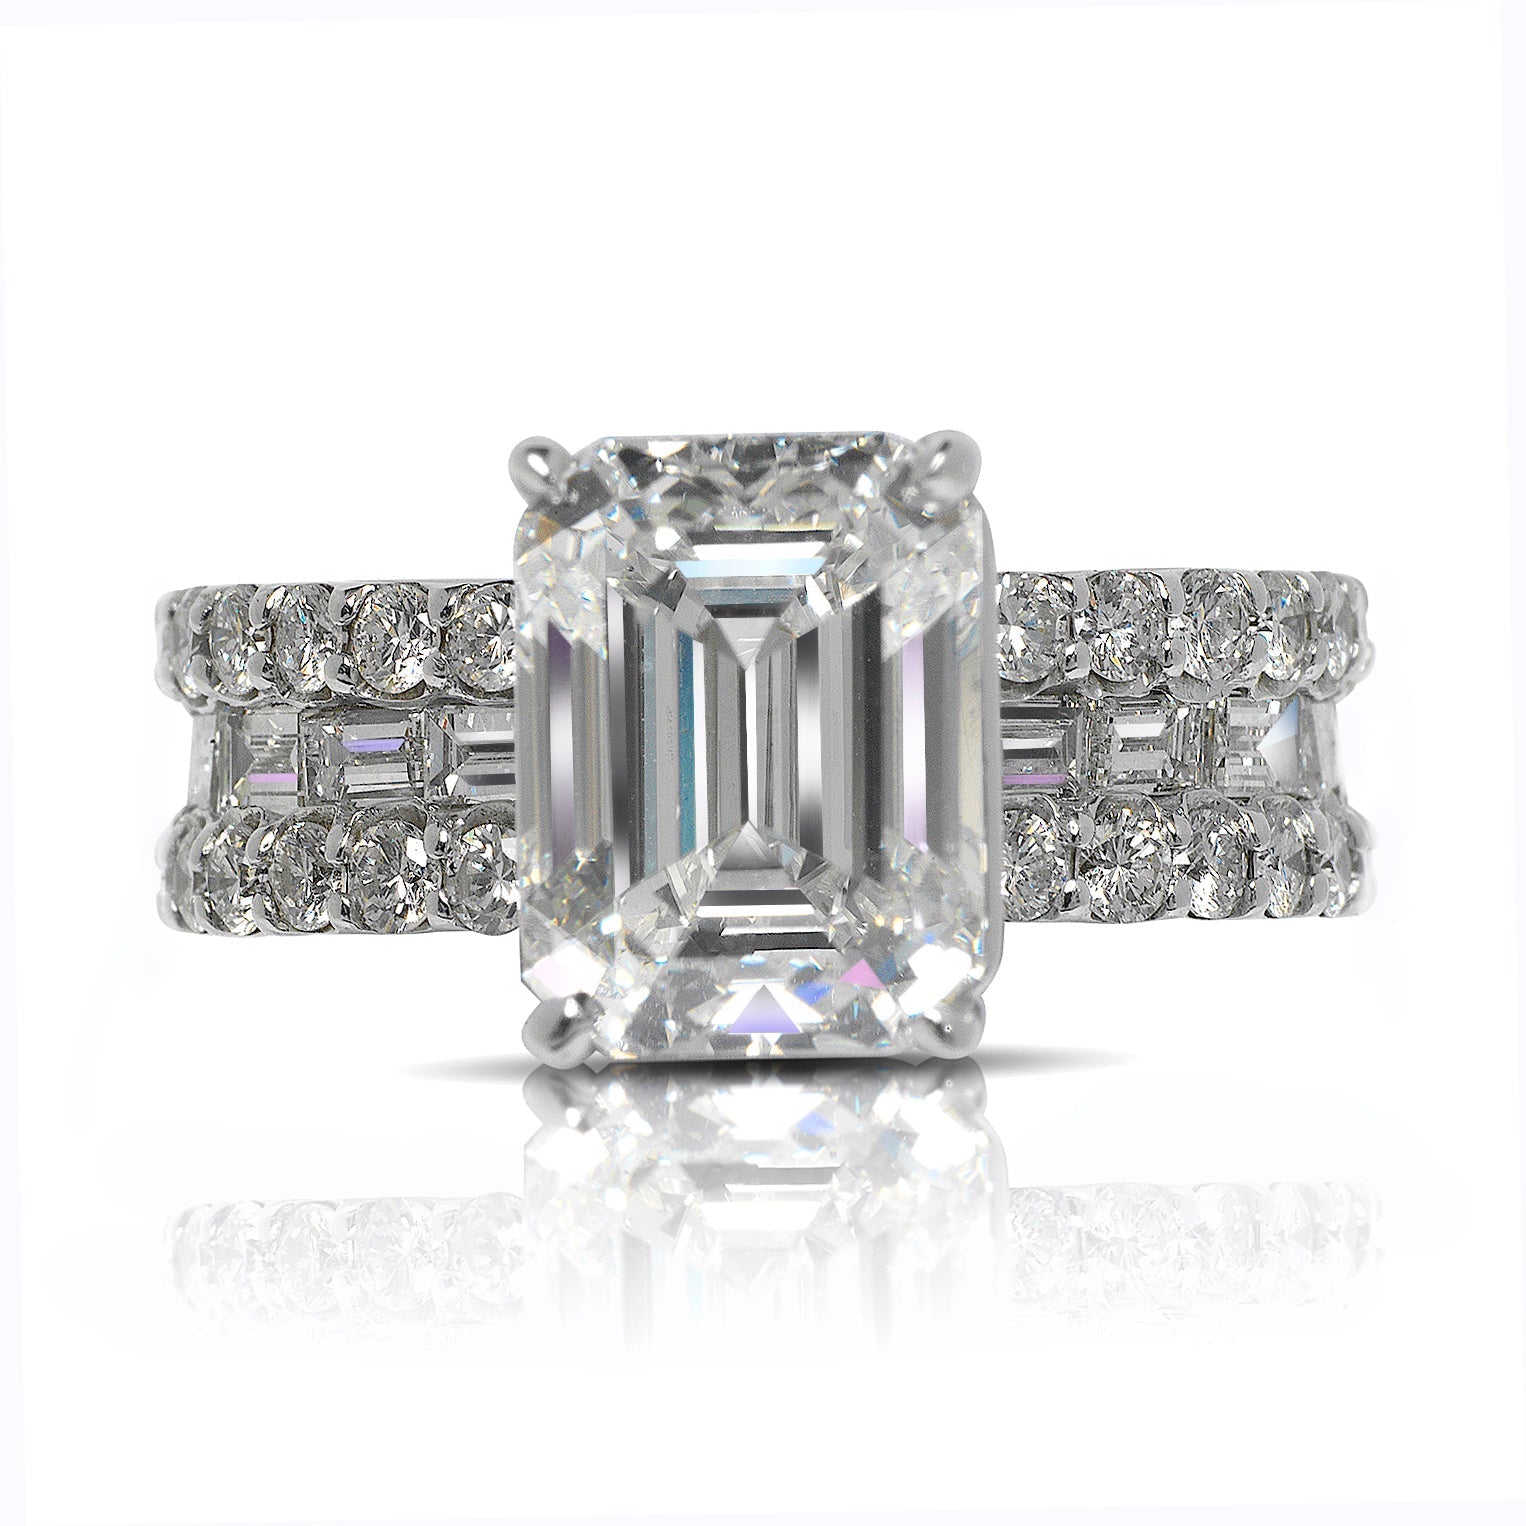 Diamond Ring Emerald Cut 7 Carat Sidestone Ring in 14K White Gold Front View